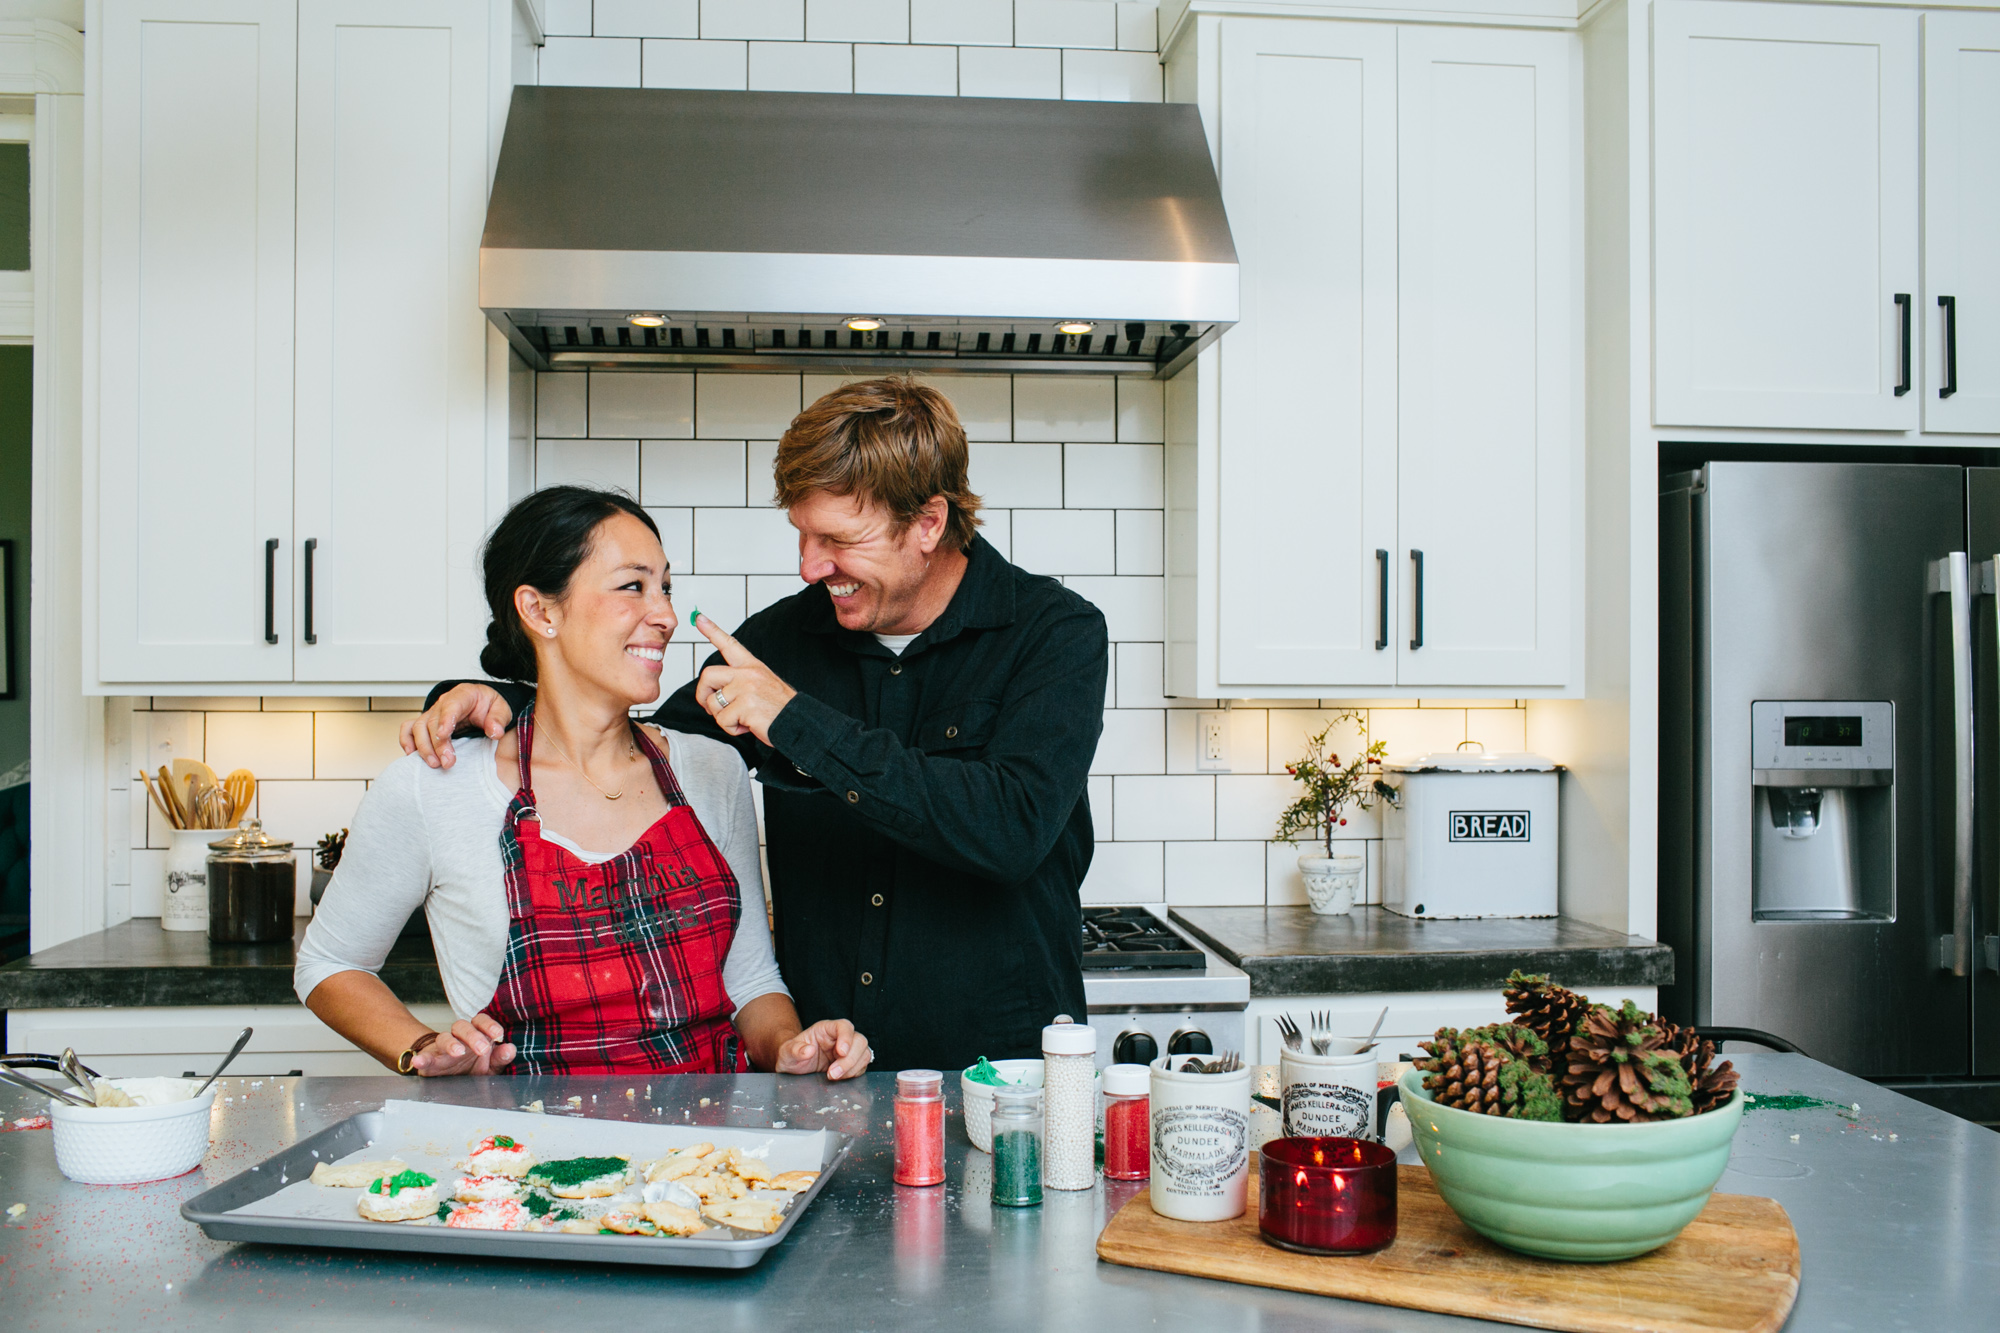 Chip and Joanna Gaines baking holiday cookies together.